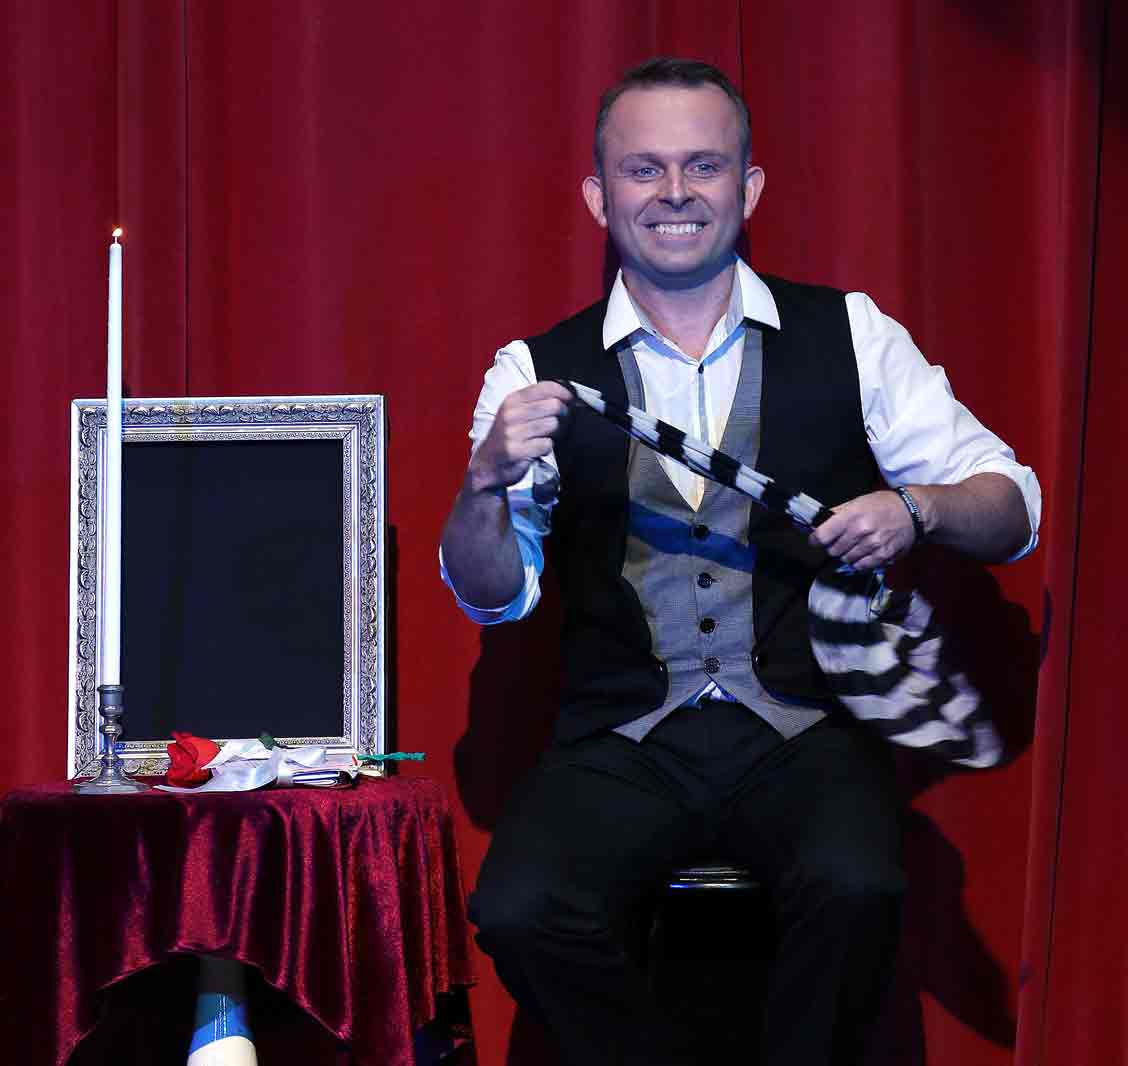 andrew green performing at the magic circle in london